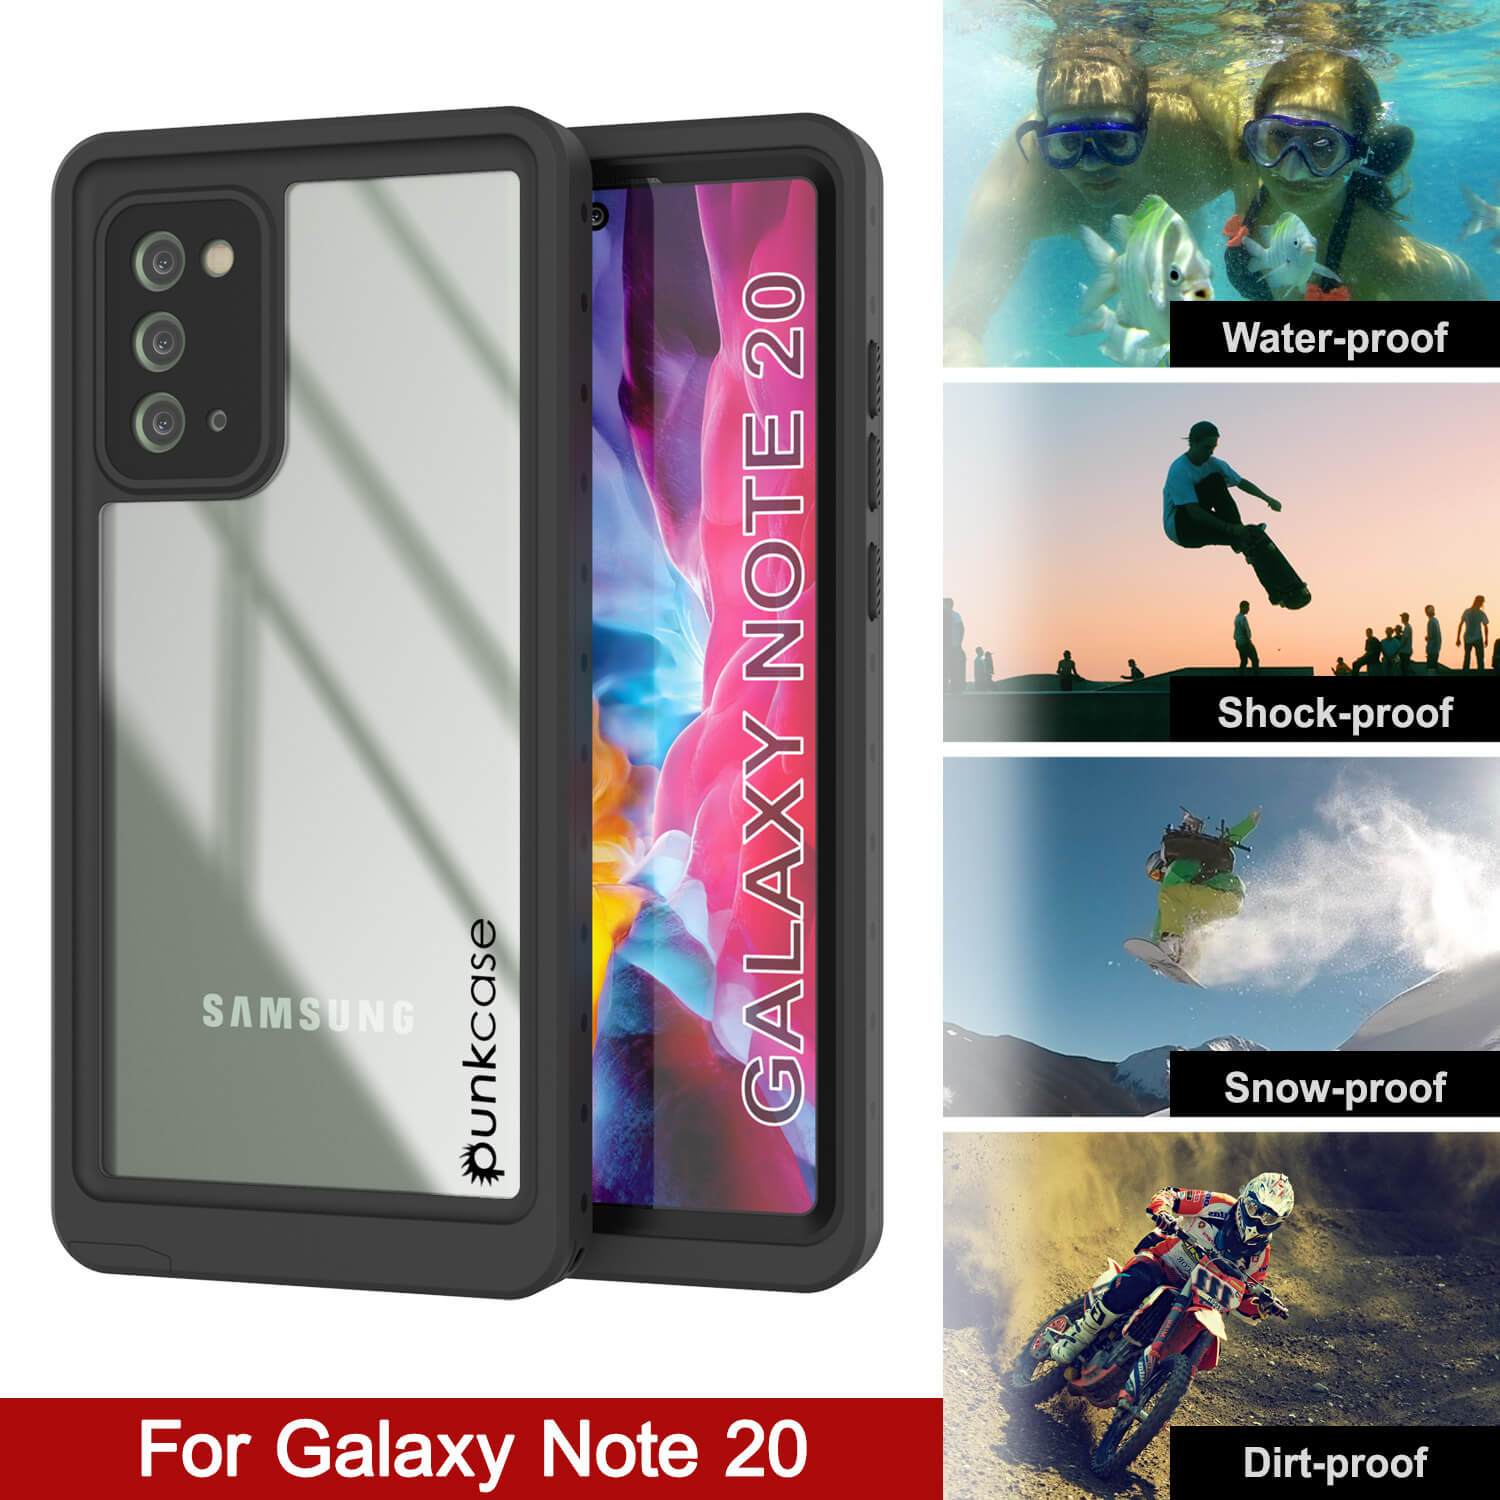 Galaxy Note 20 Waterproof Case, Punkcase Studstar Clear Thin Armor Cover